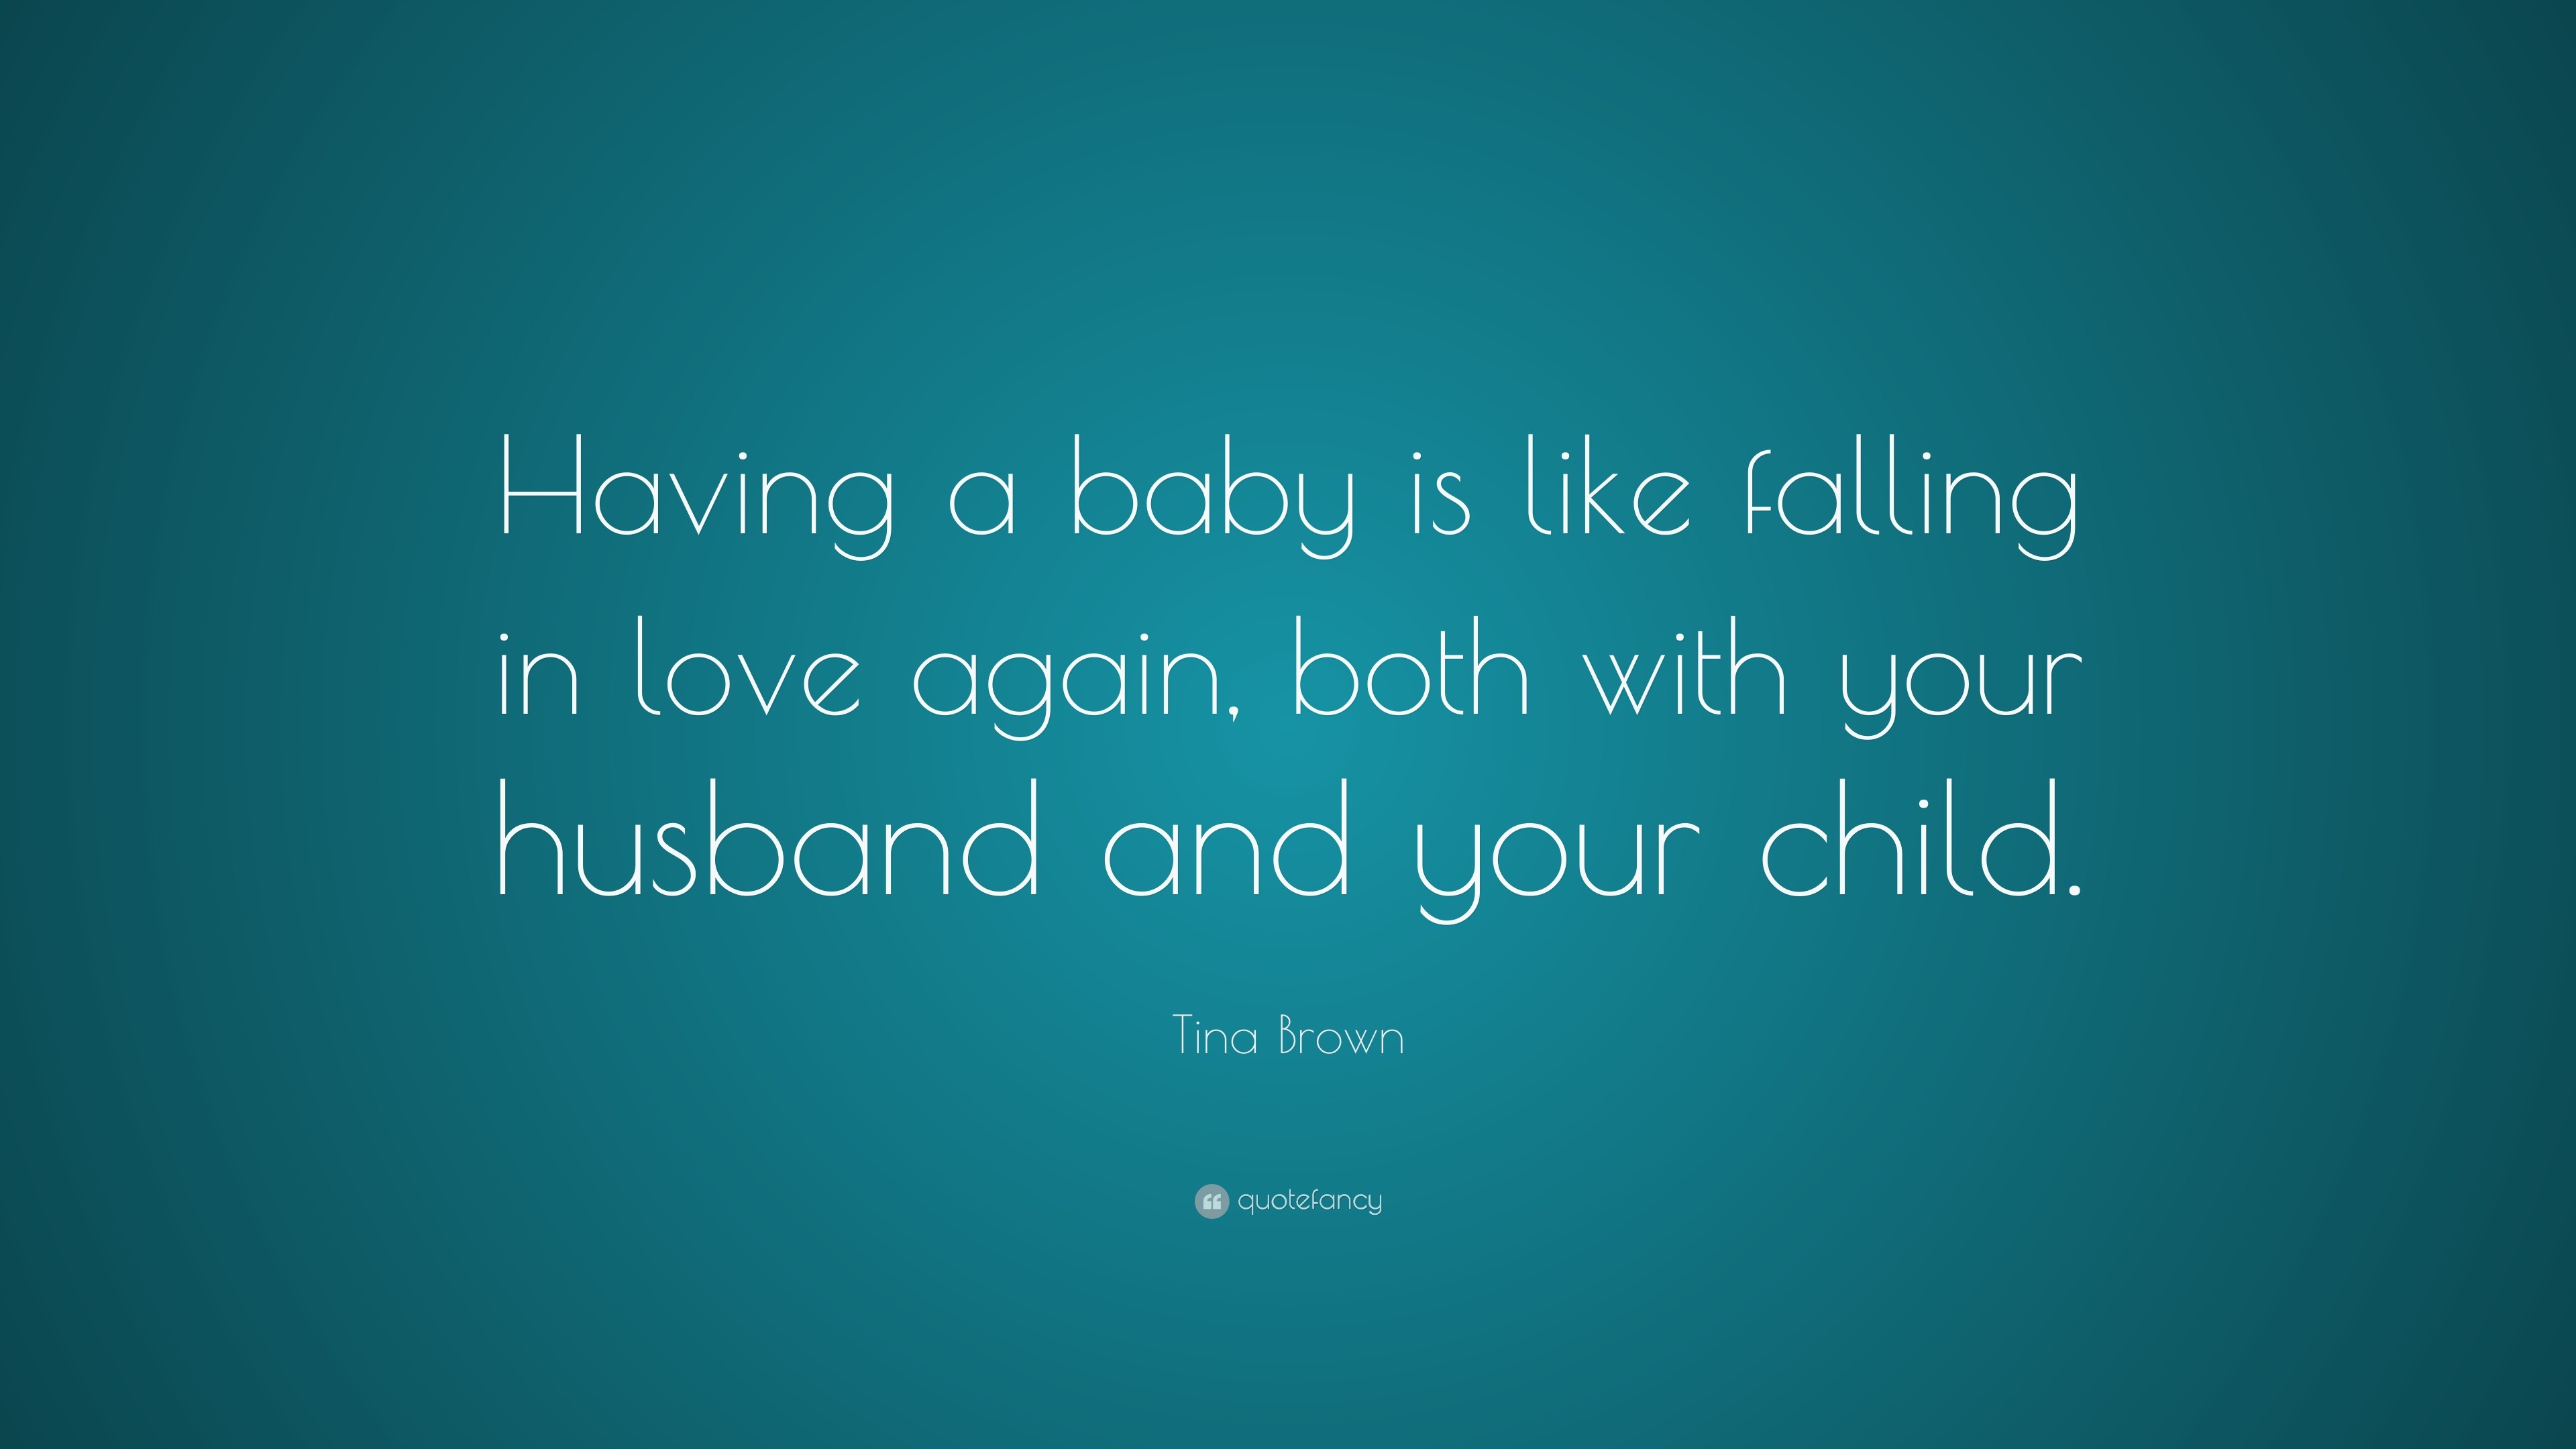 Tina Brown Quote “Having a baby is like falling in love again both